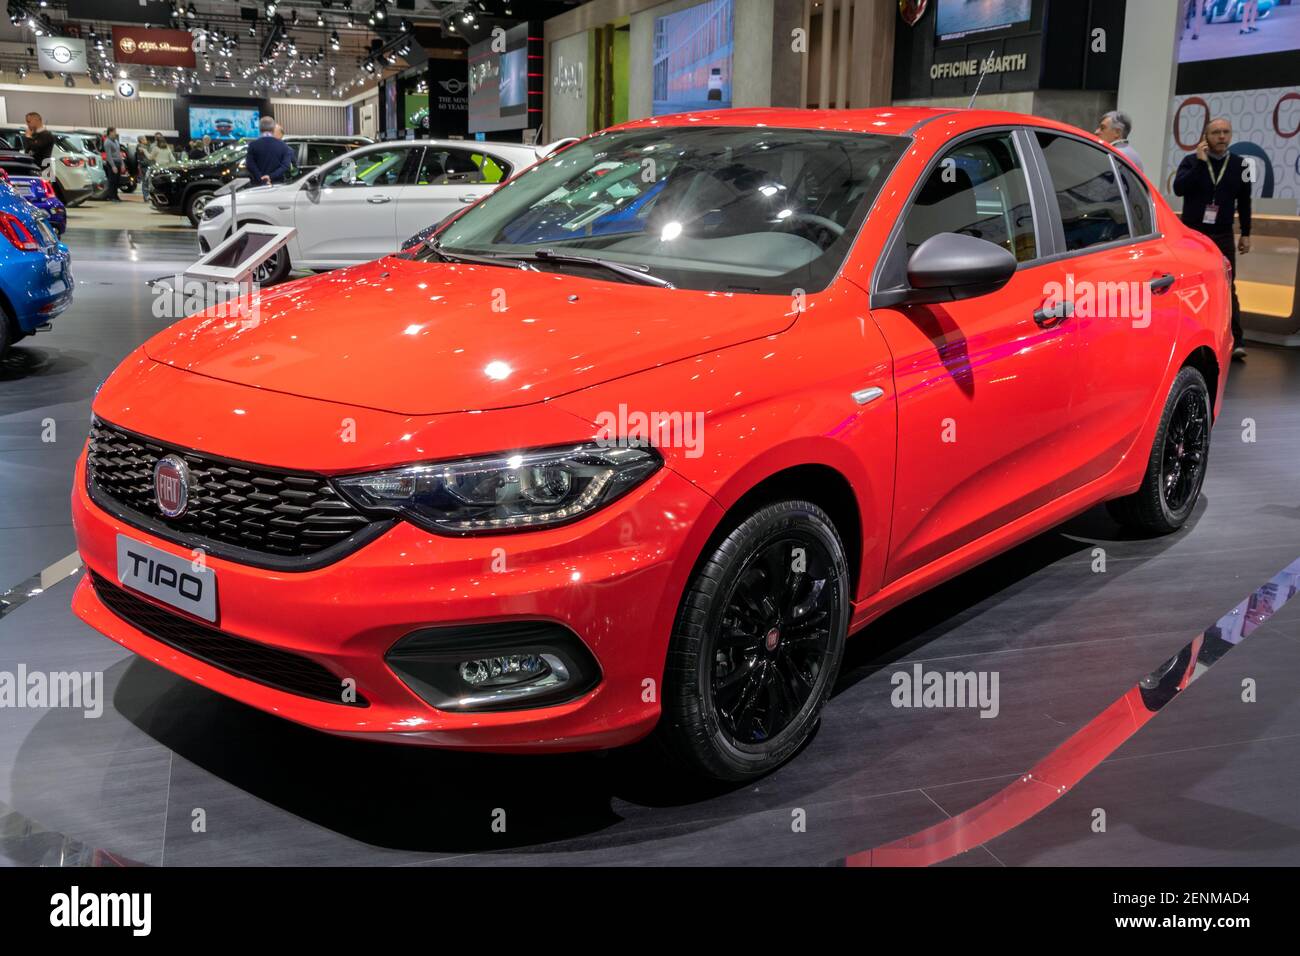 Fiat Tipo car at the Brussels Autosalon Motor Show. Belgium - January 18,  2019 Stock Photo - Alamy